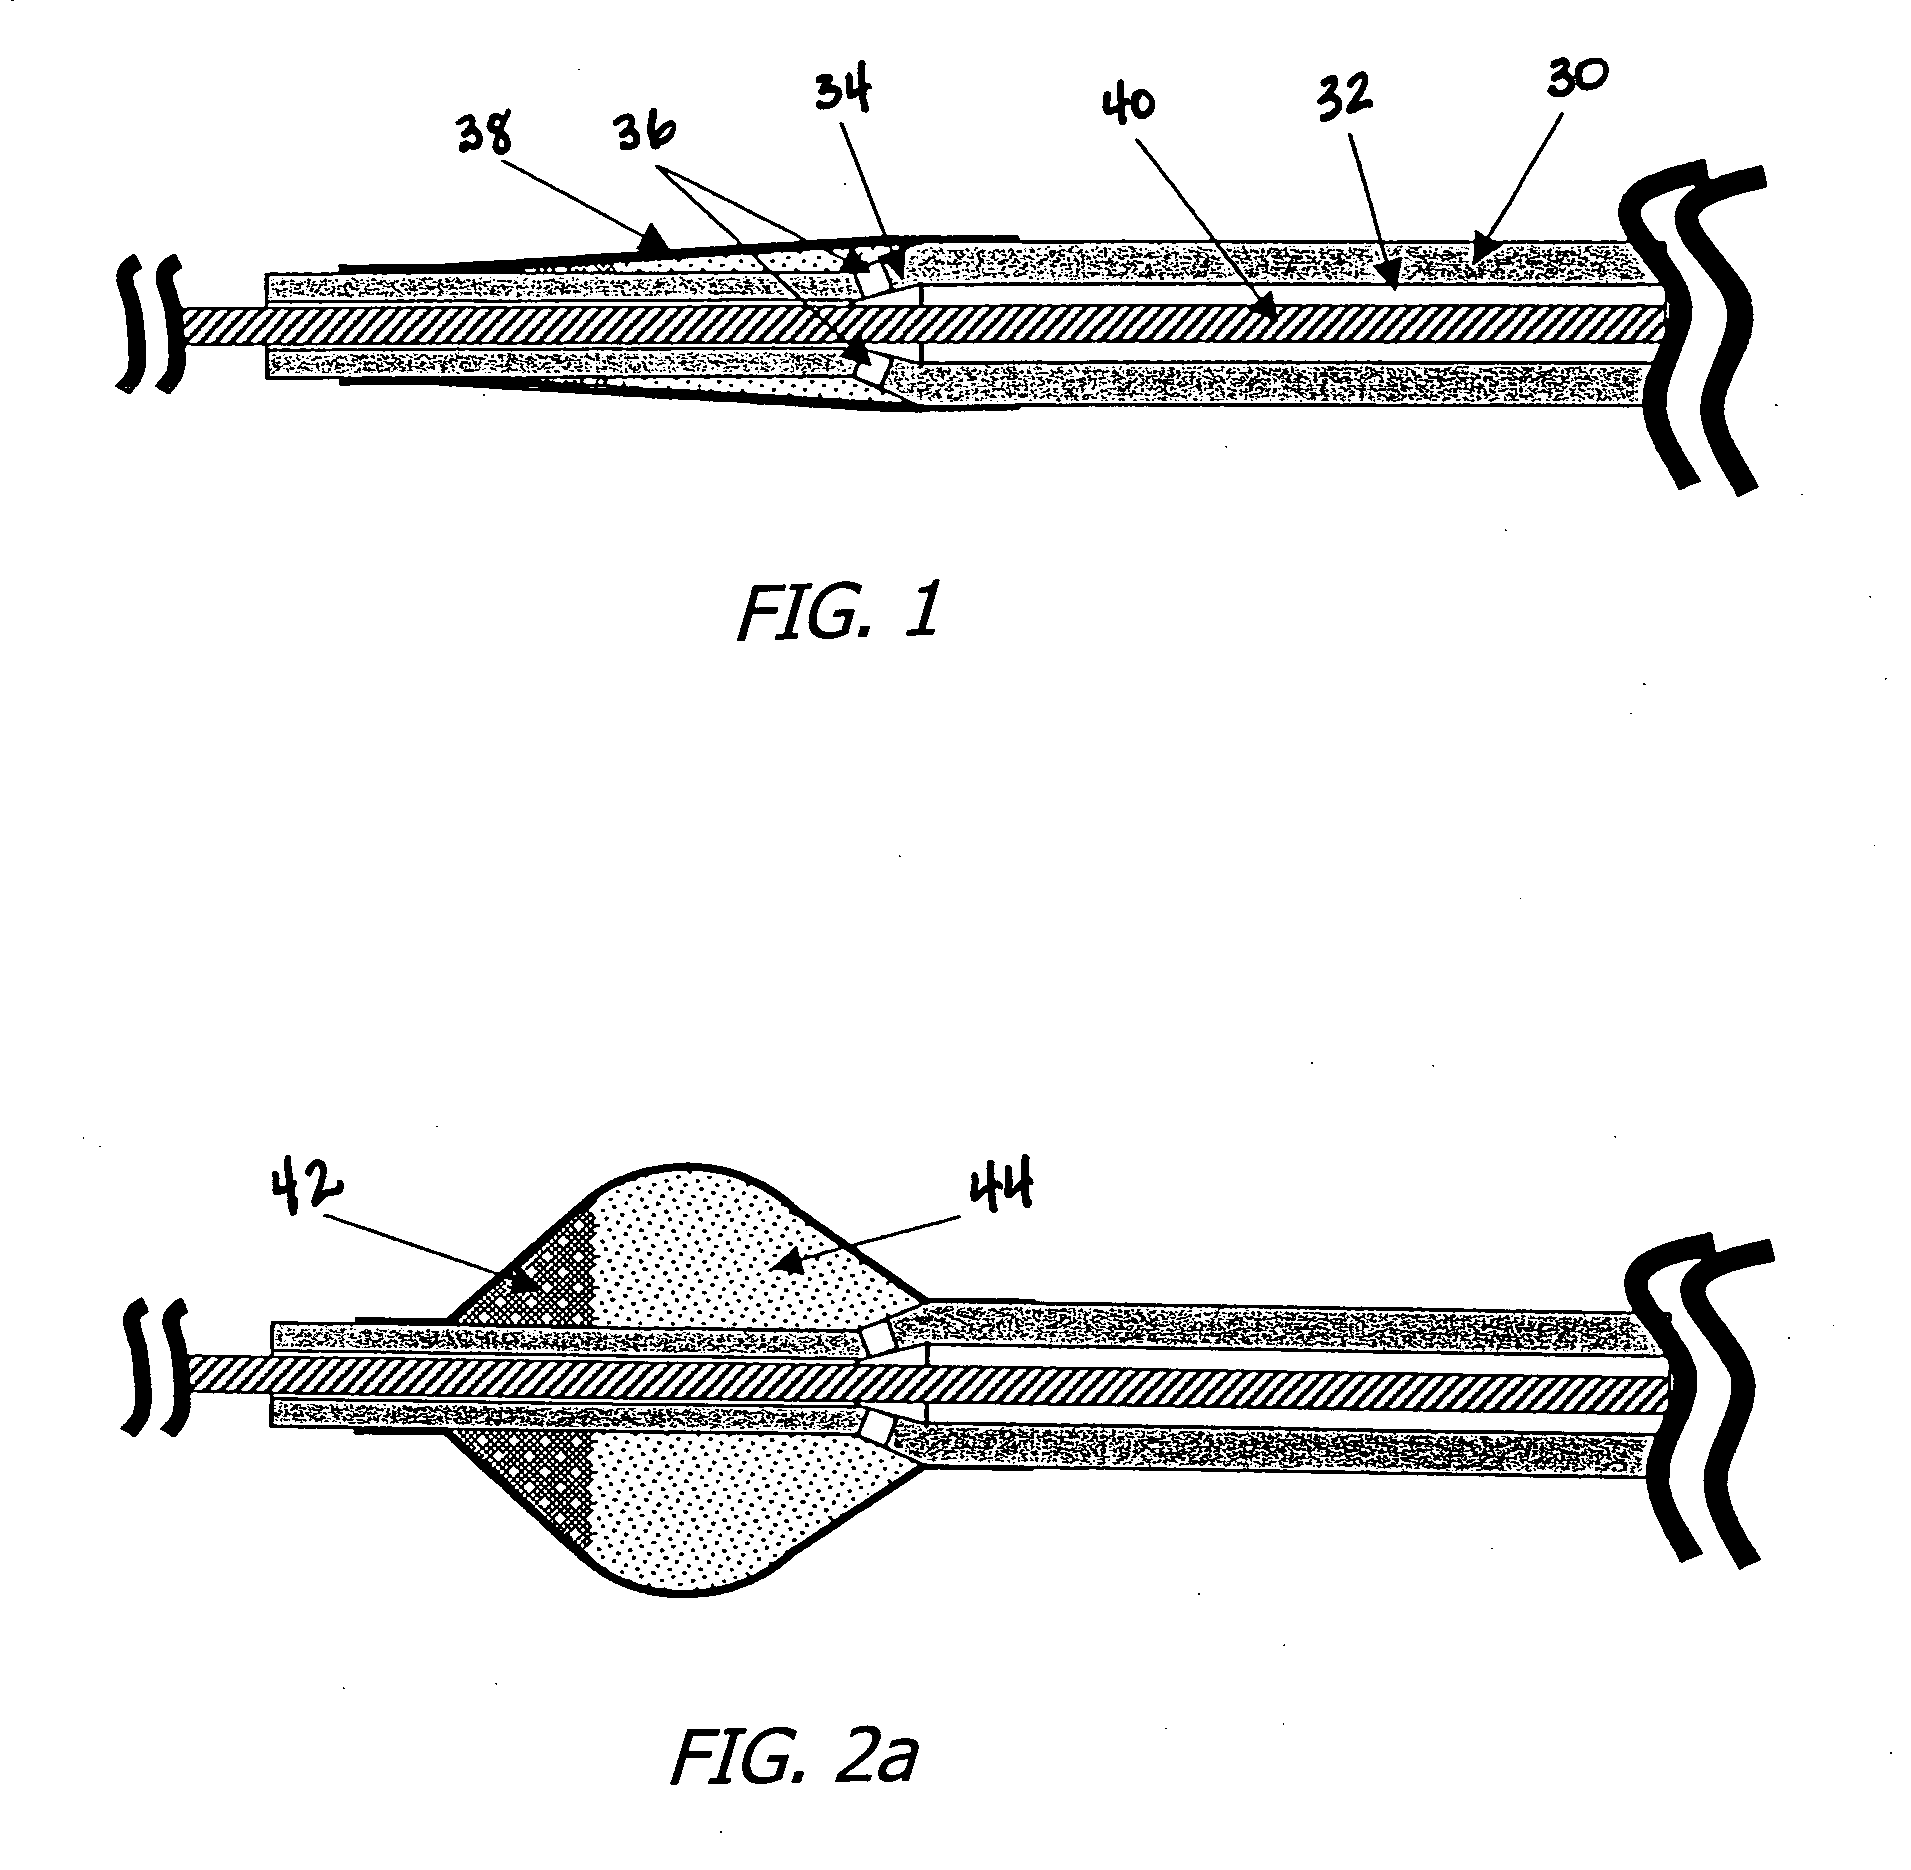 Catheter mounted automatic vessel occlusion and fluid dispersion devices